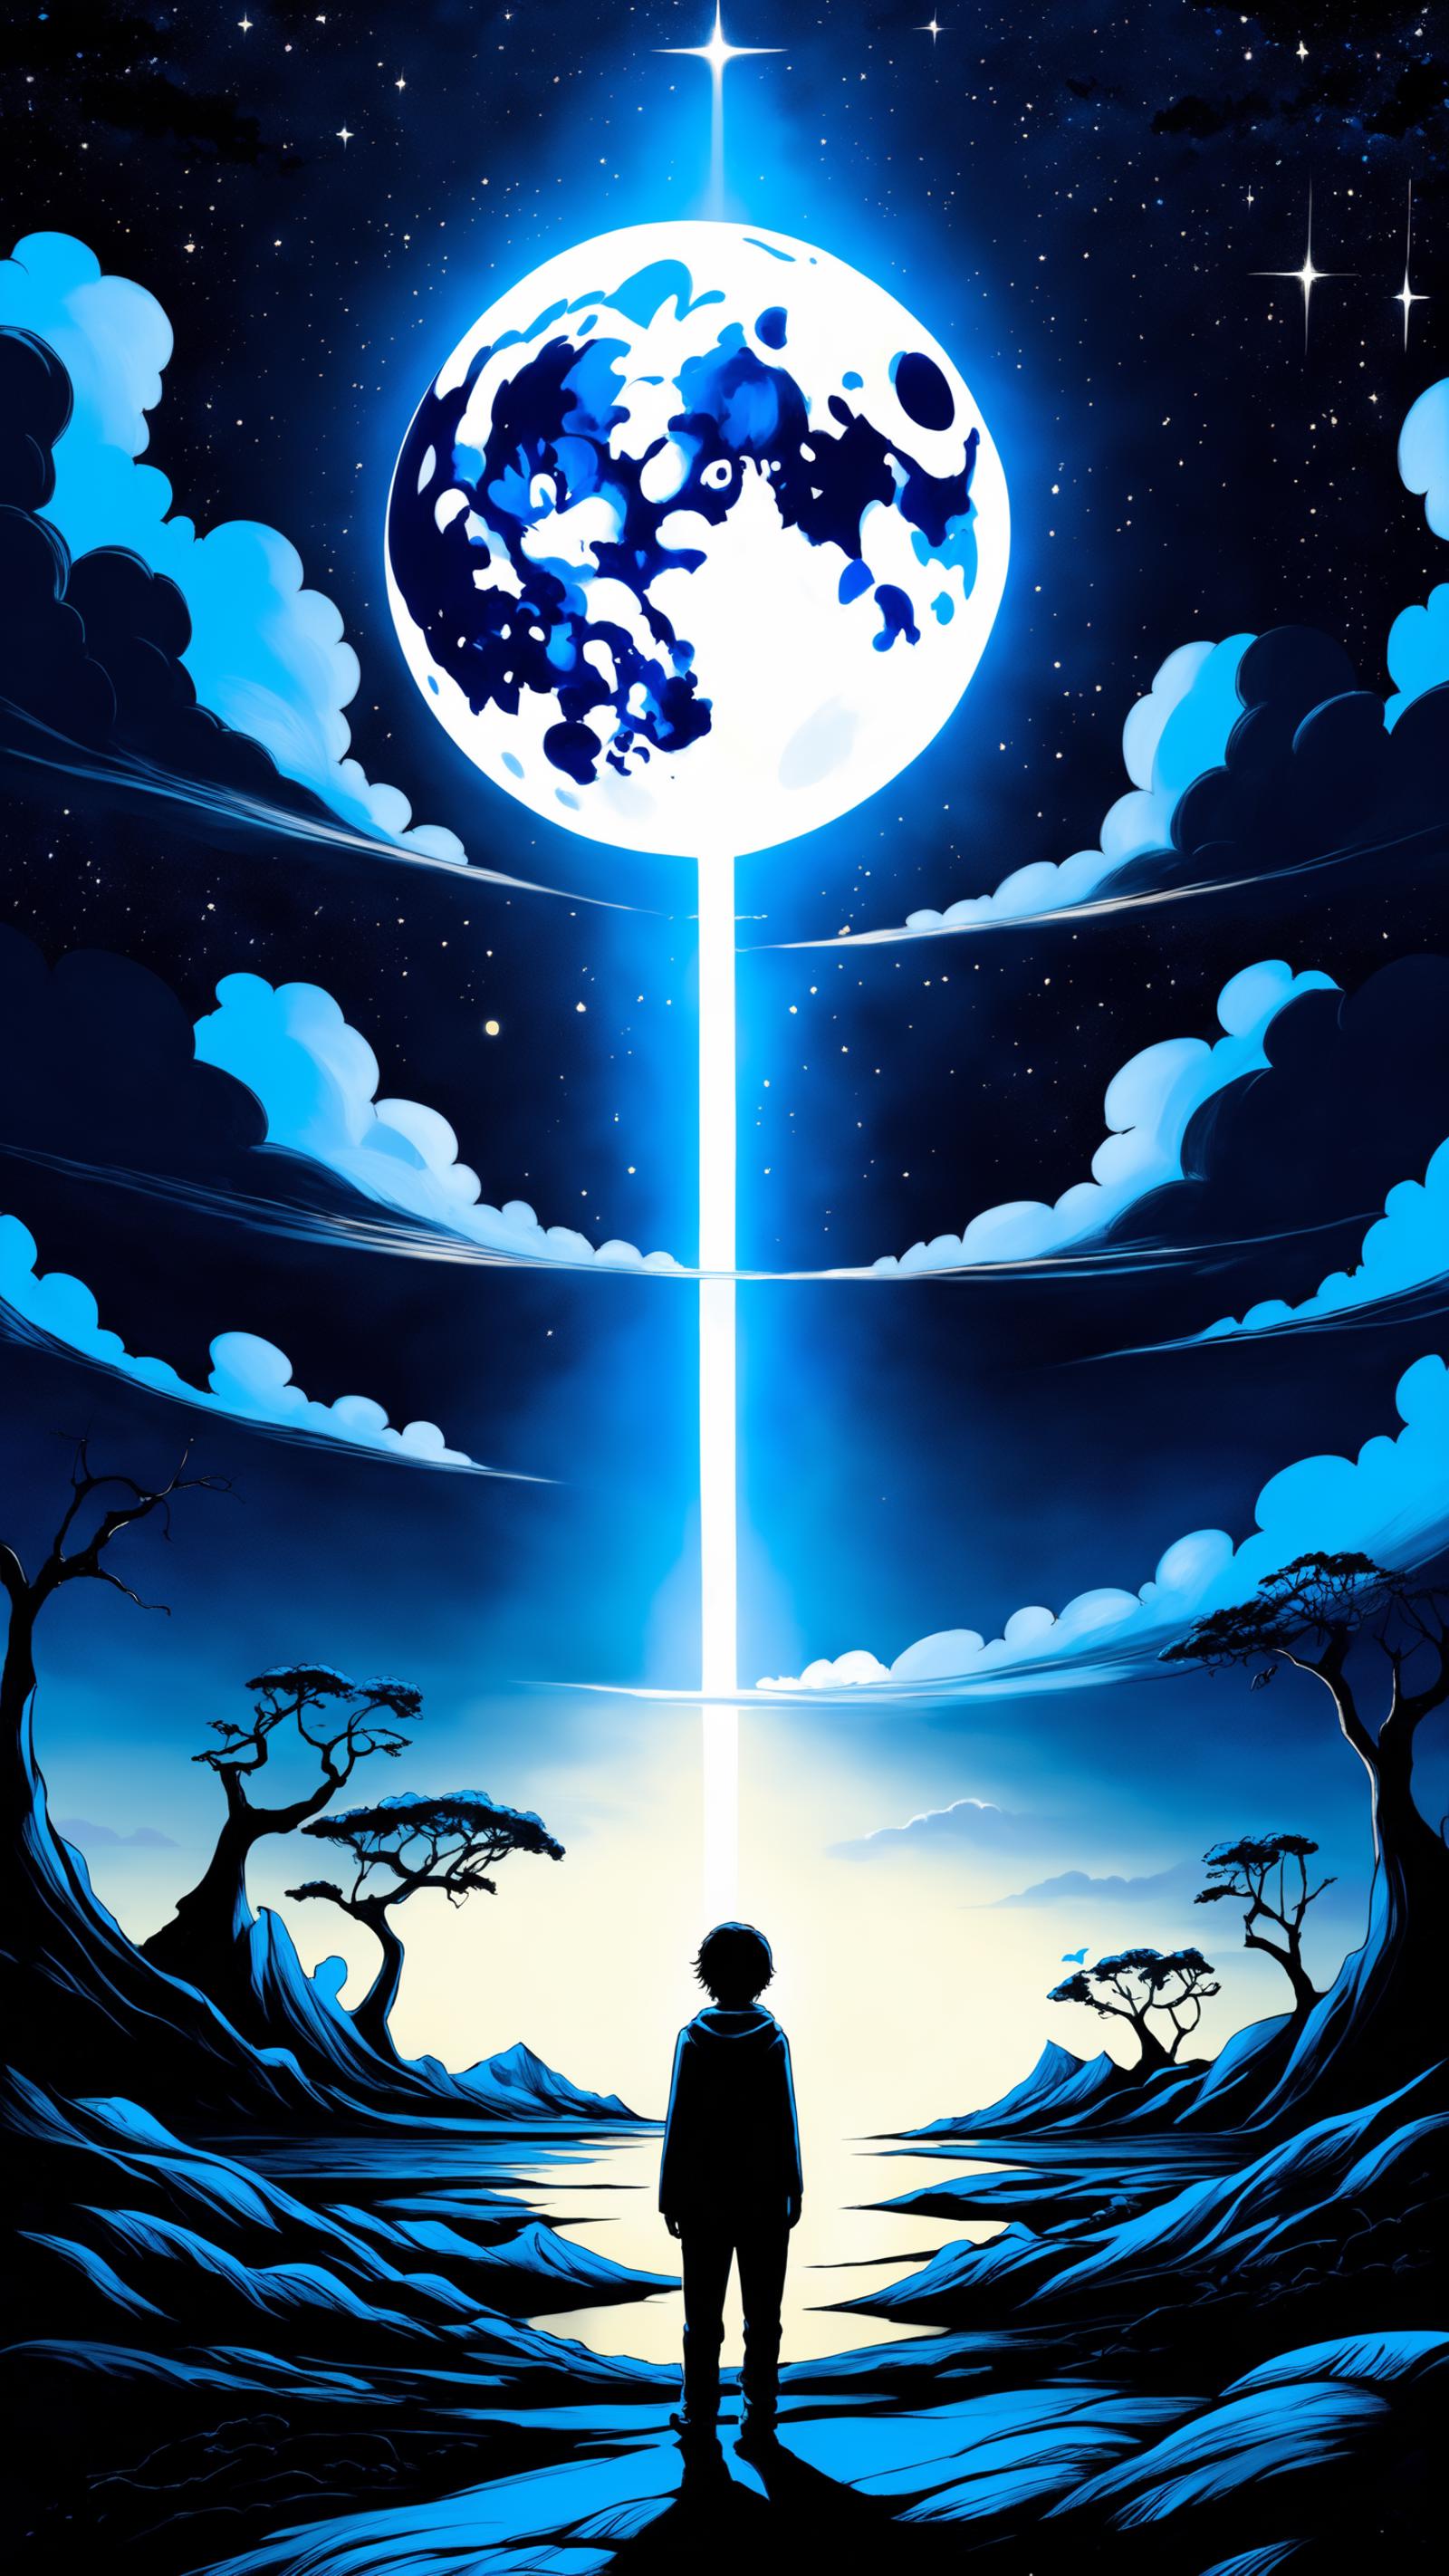 A silhouette of a person standing in front of a large moon at night with trees in the background.